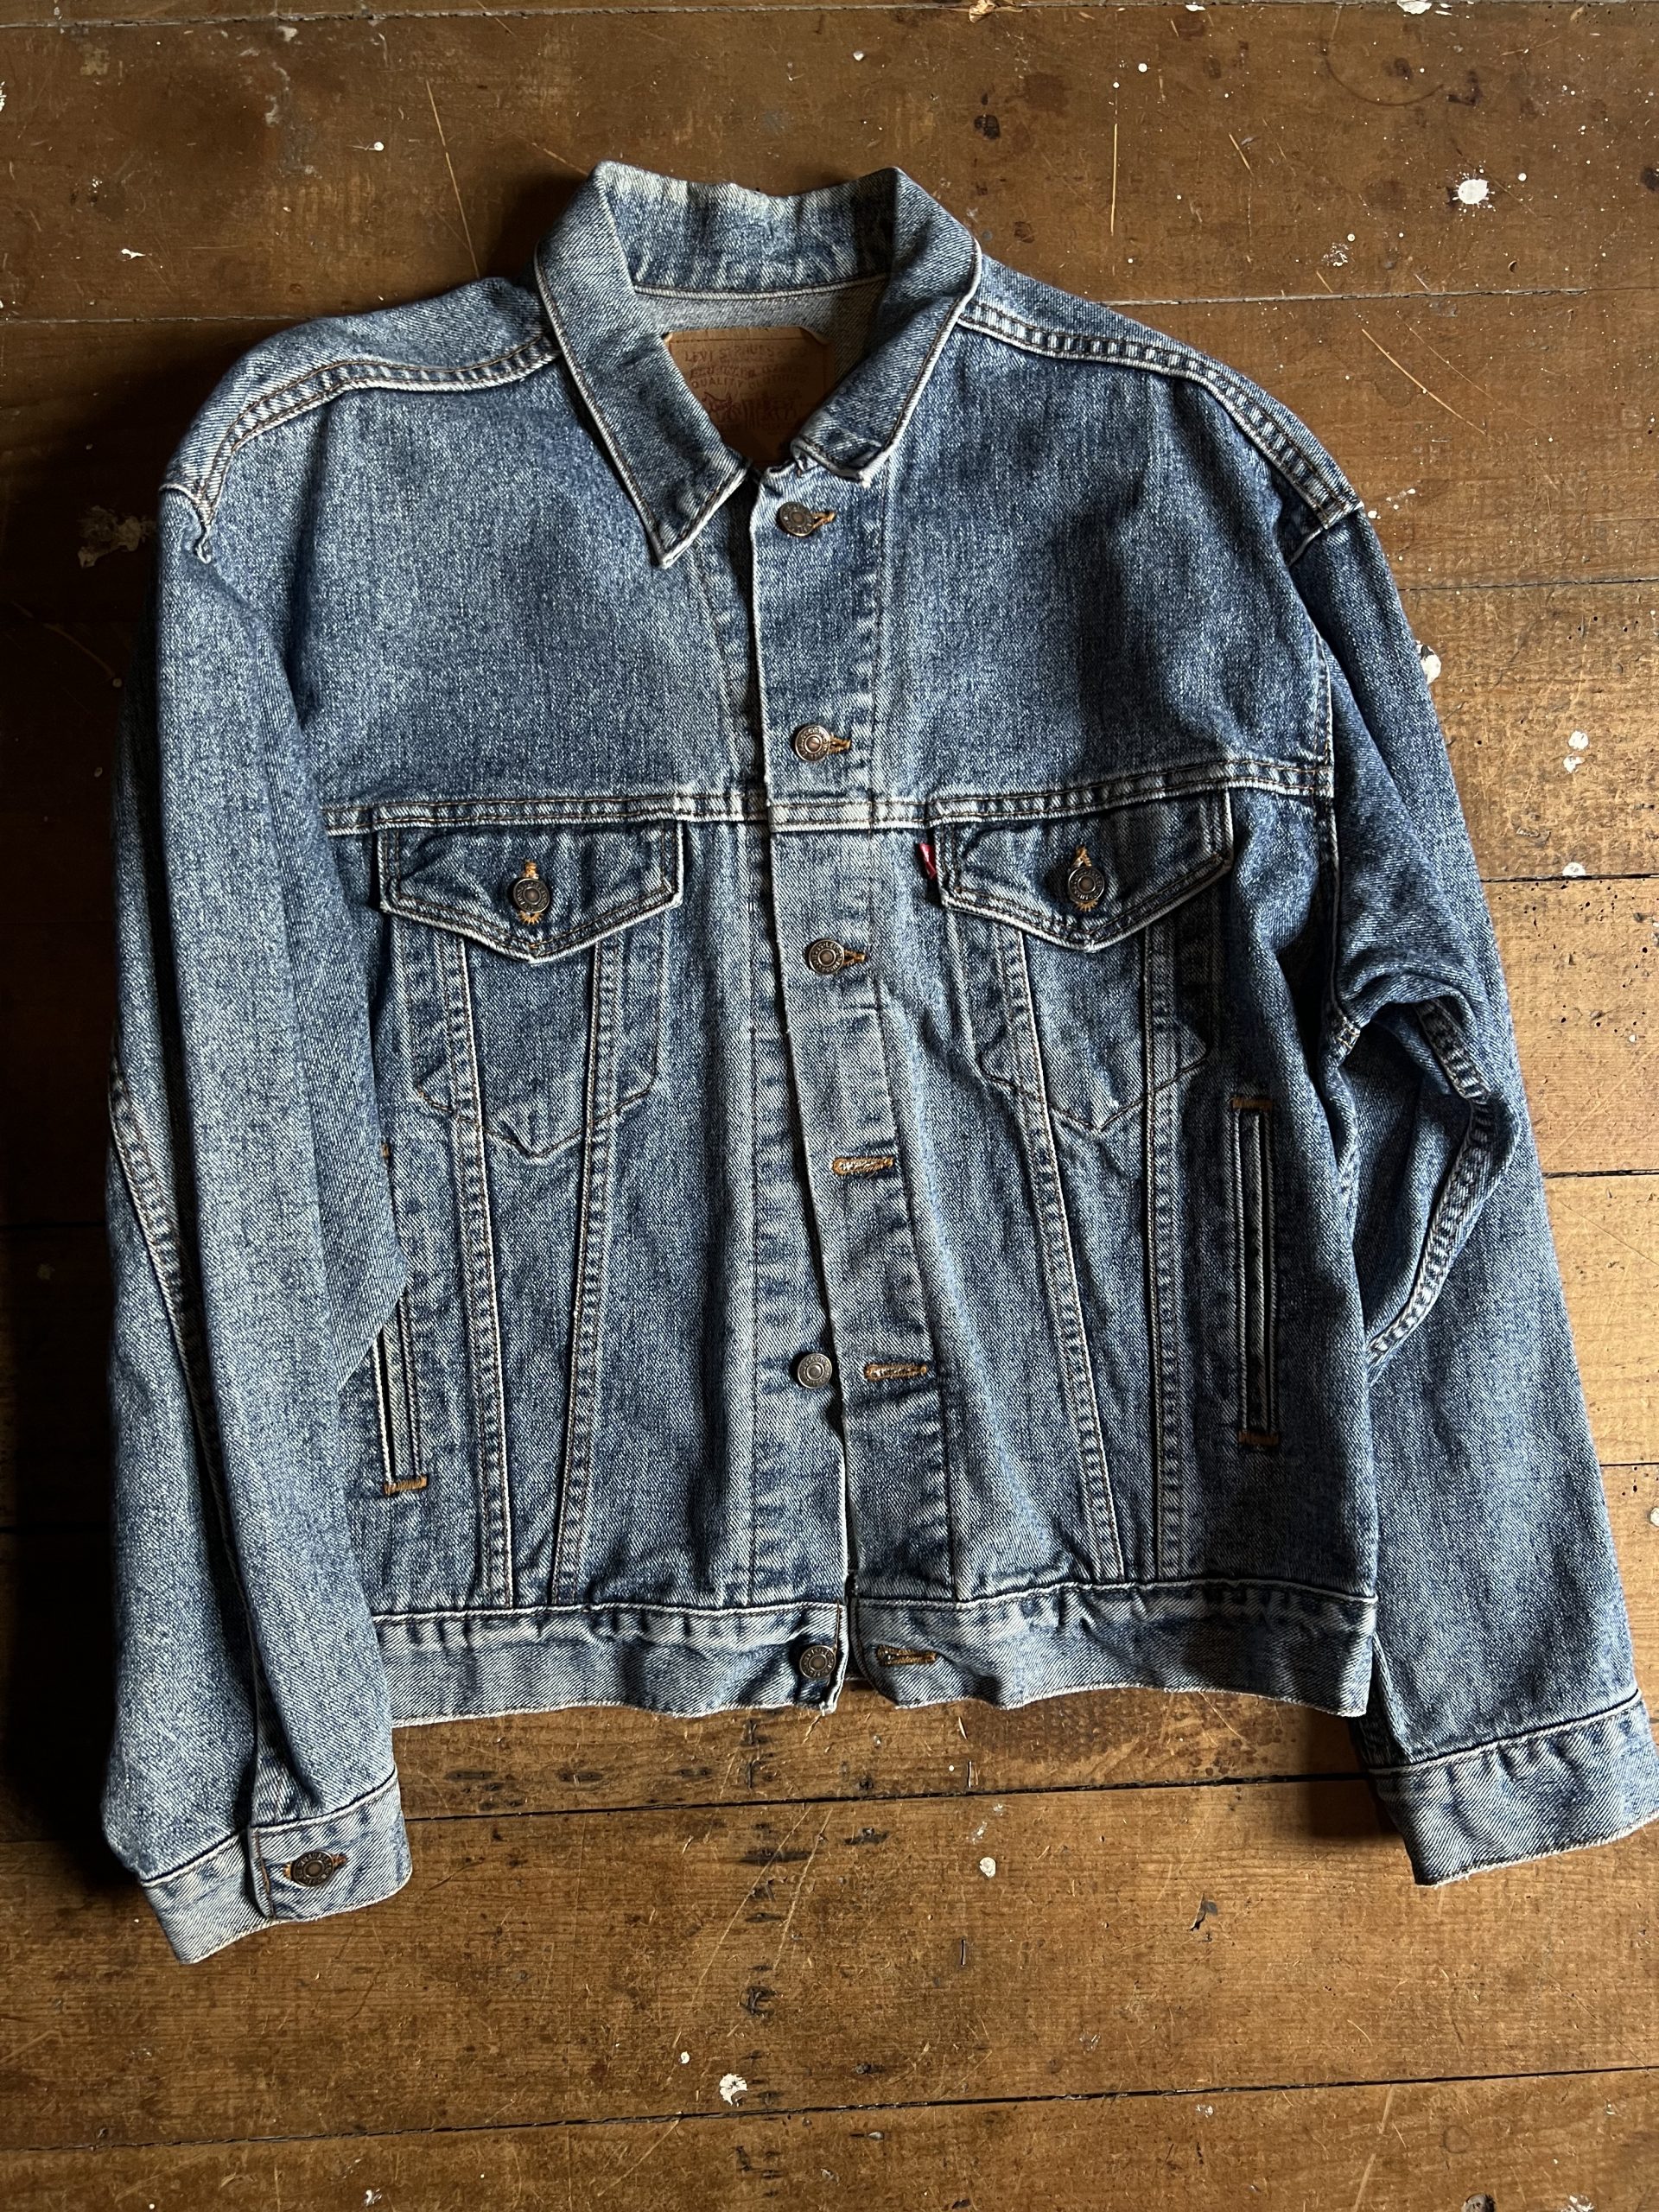 Levi's Trucker Jacket - Red Tab - Search and Destroy